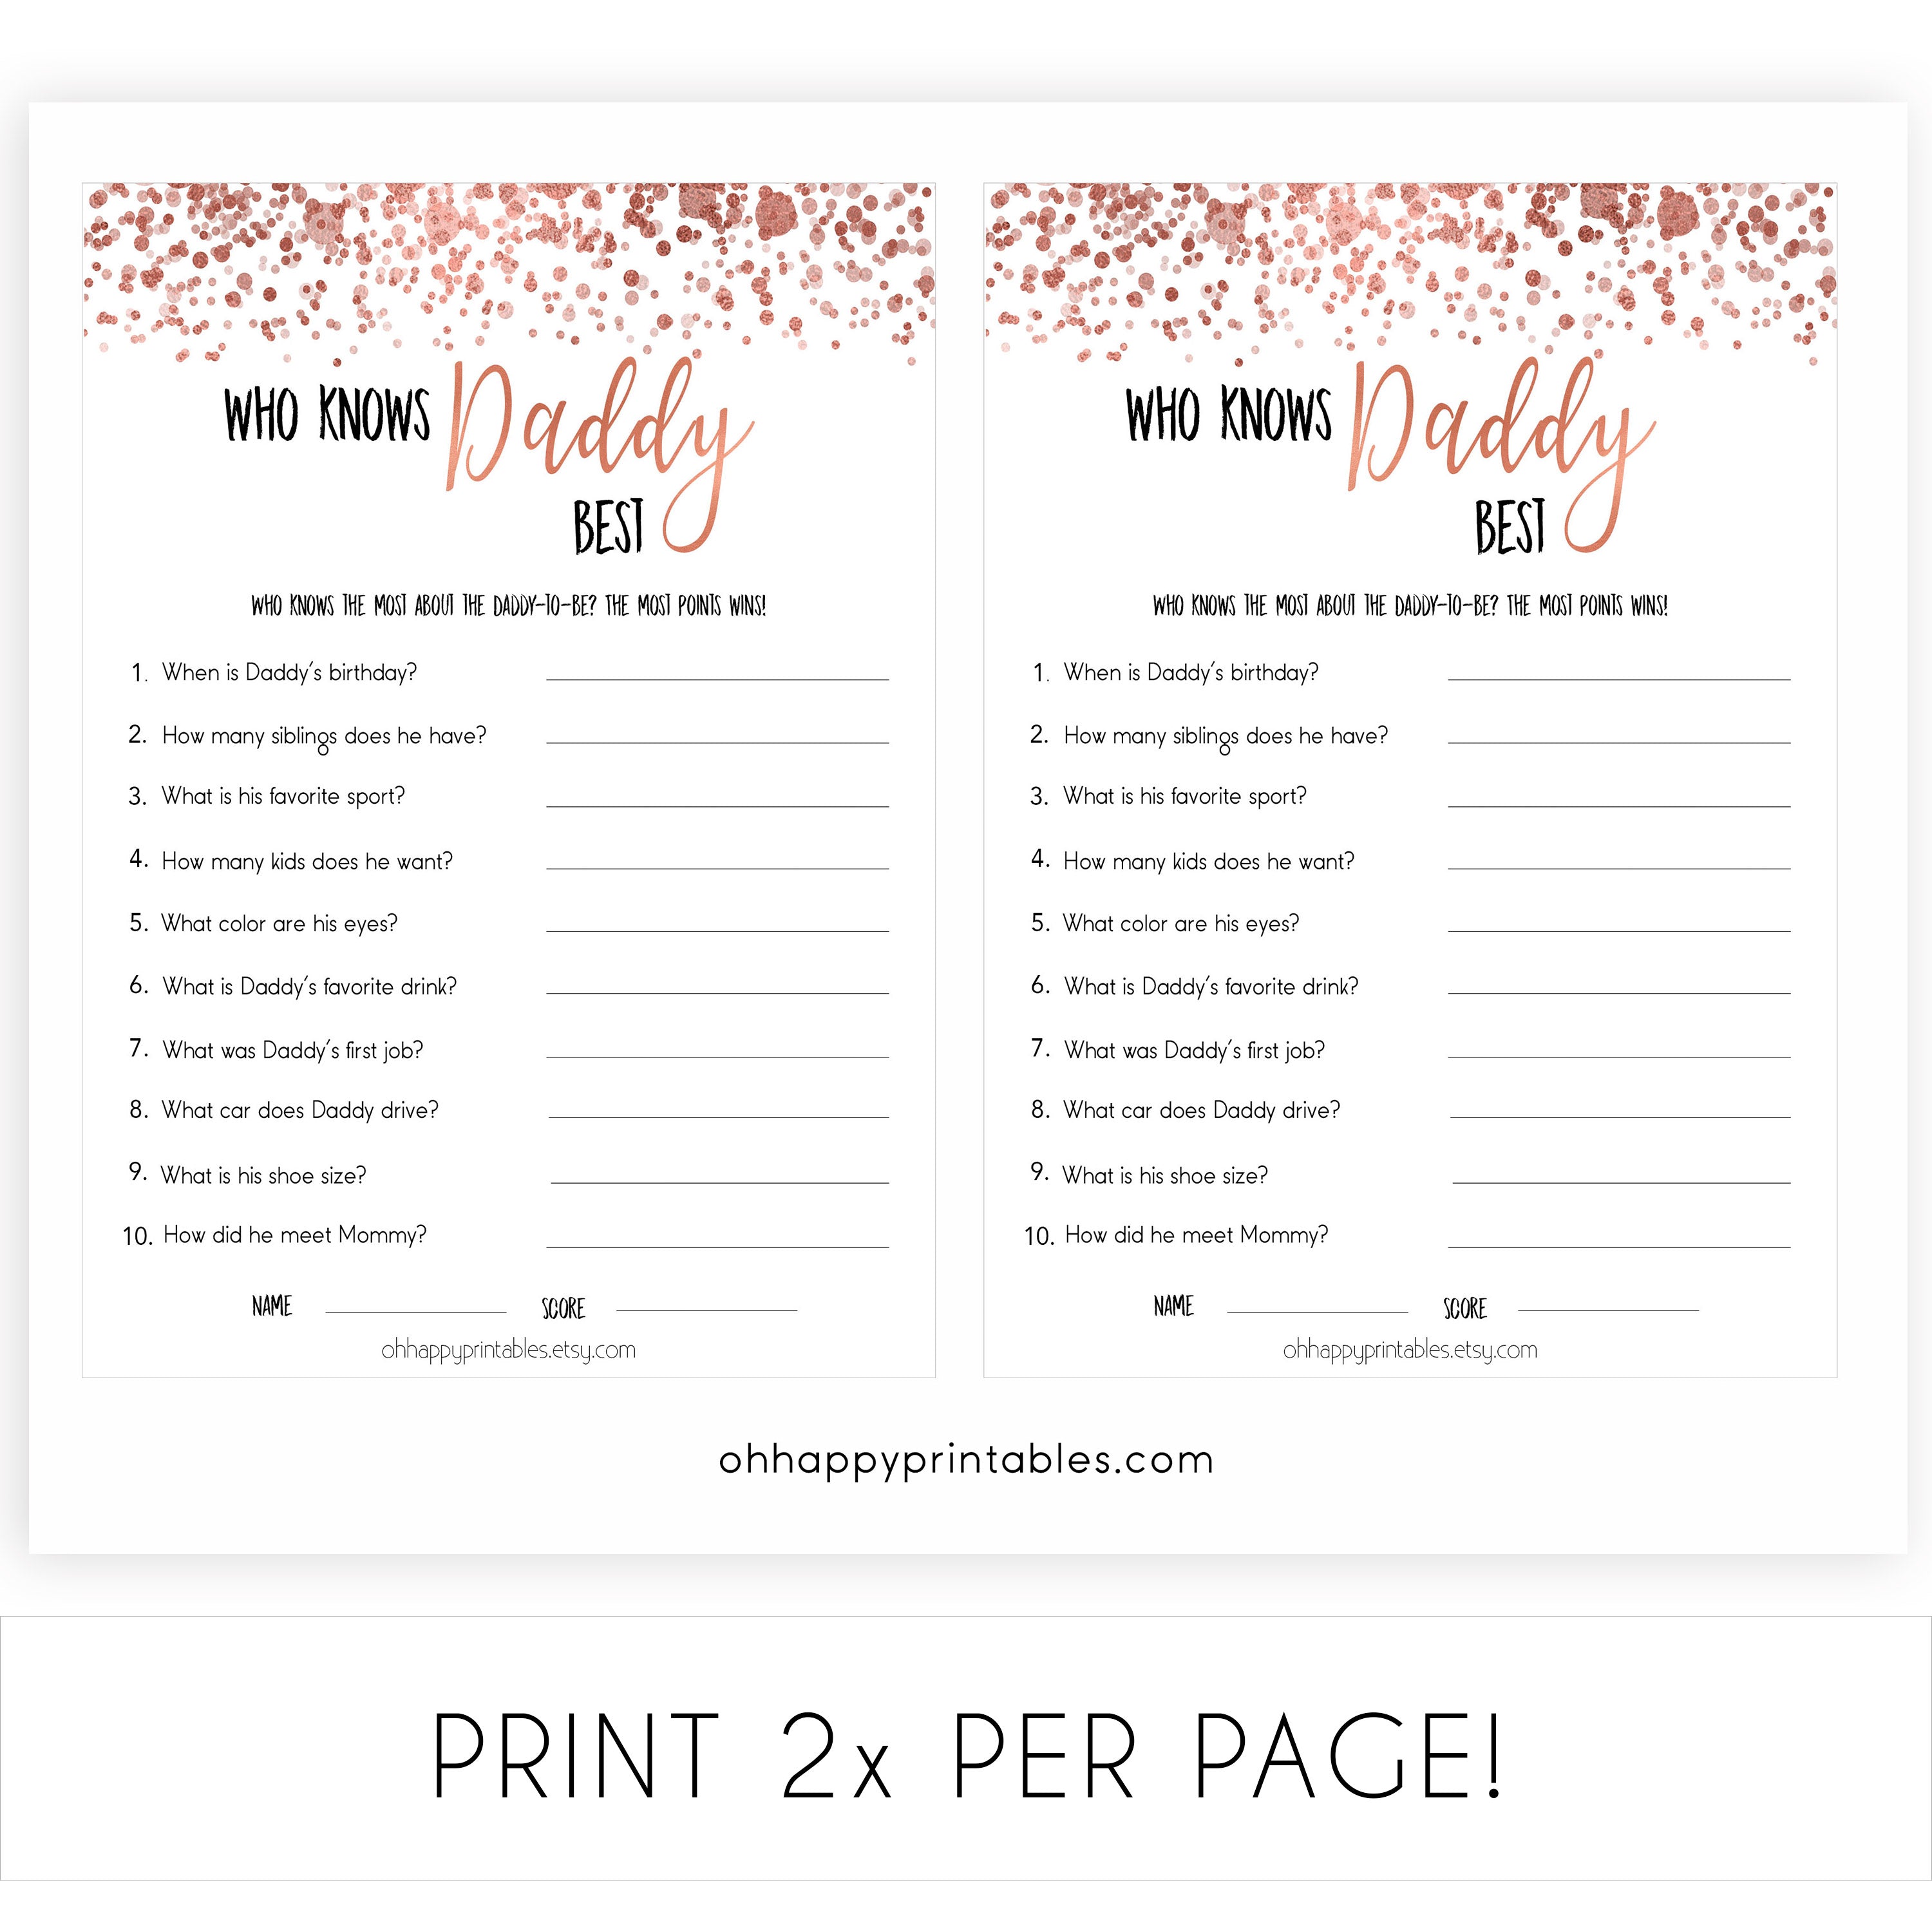 Rose Gold Who Knows Daddy Best, How Well Do you Know Daddy Games, Who Knows Daddy Game, Baby Shower Games, Rose Gold Baby Shower, Printable baby shower games, fun baby shower games, popular baby shower games